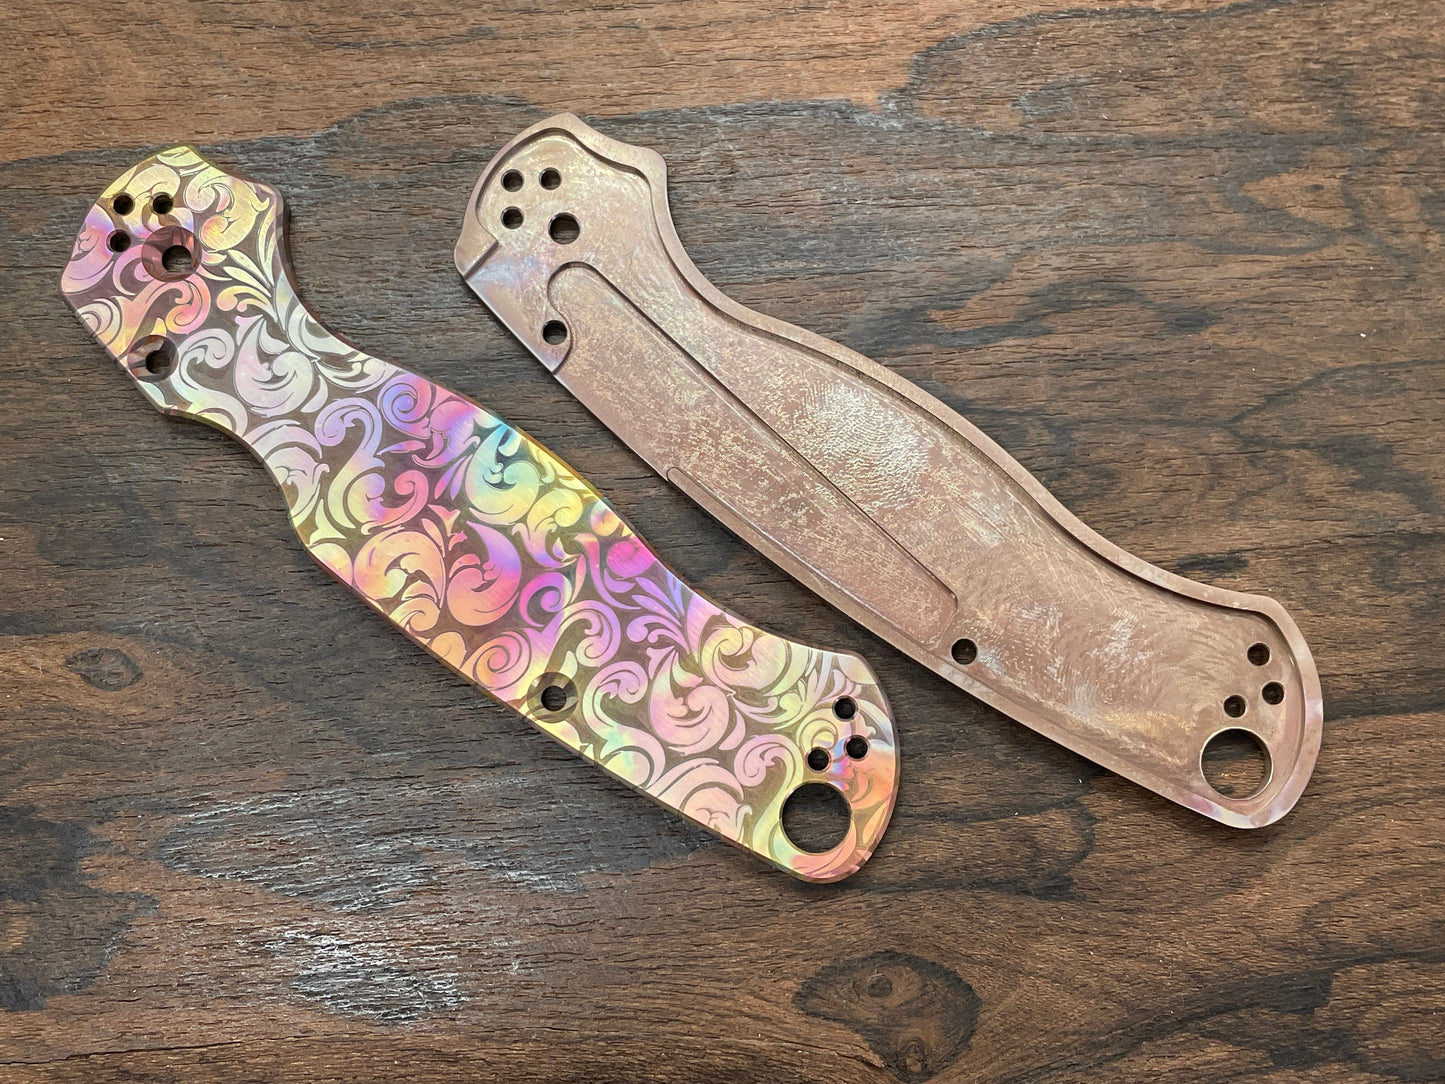 Flamed VICTORIA Copper scales for Spyderco Paramilitary 2 PM2